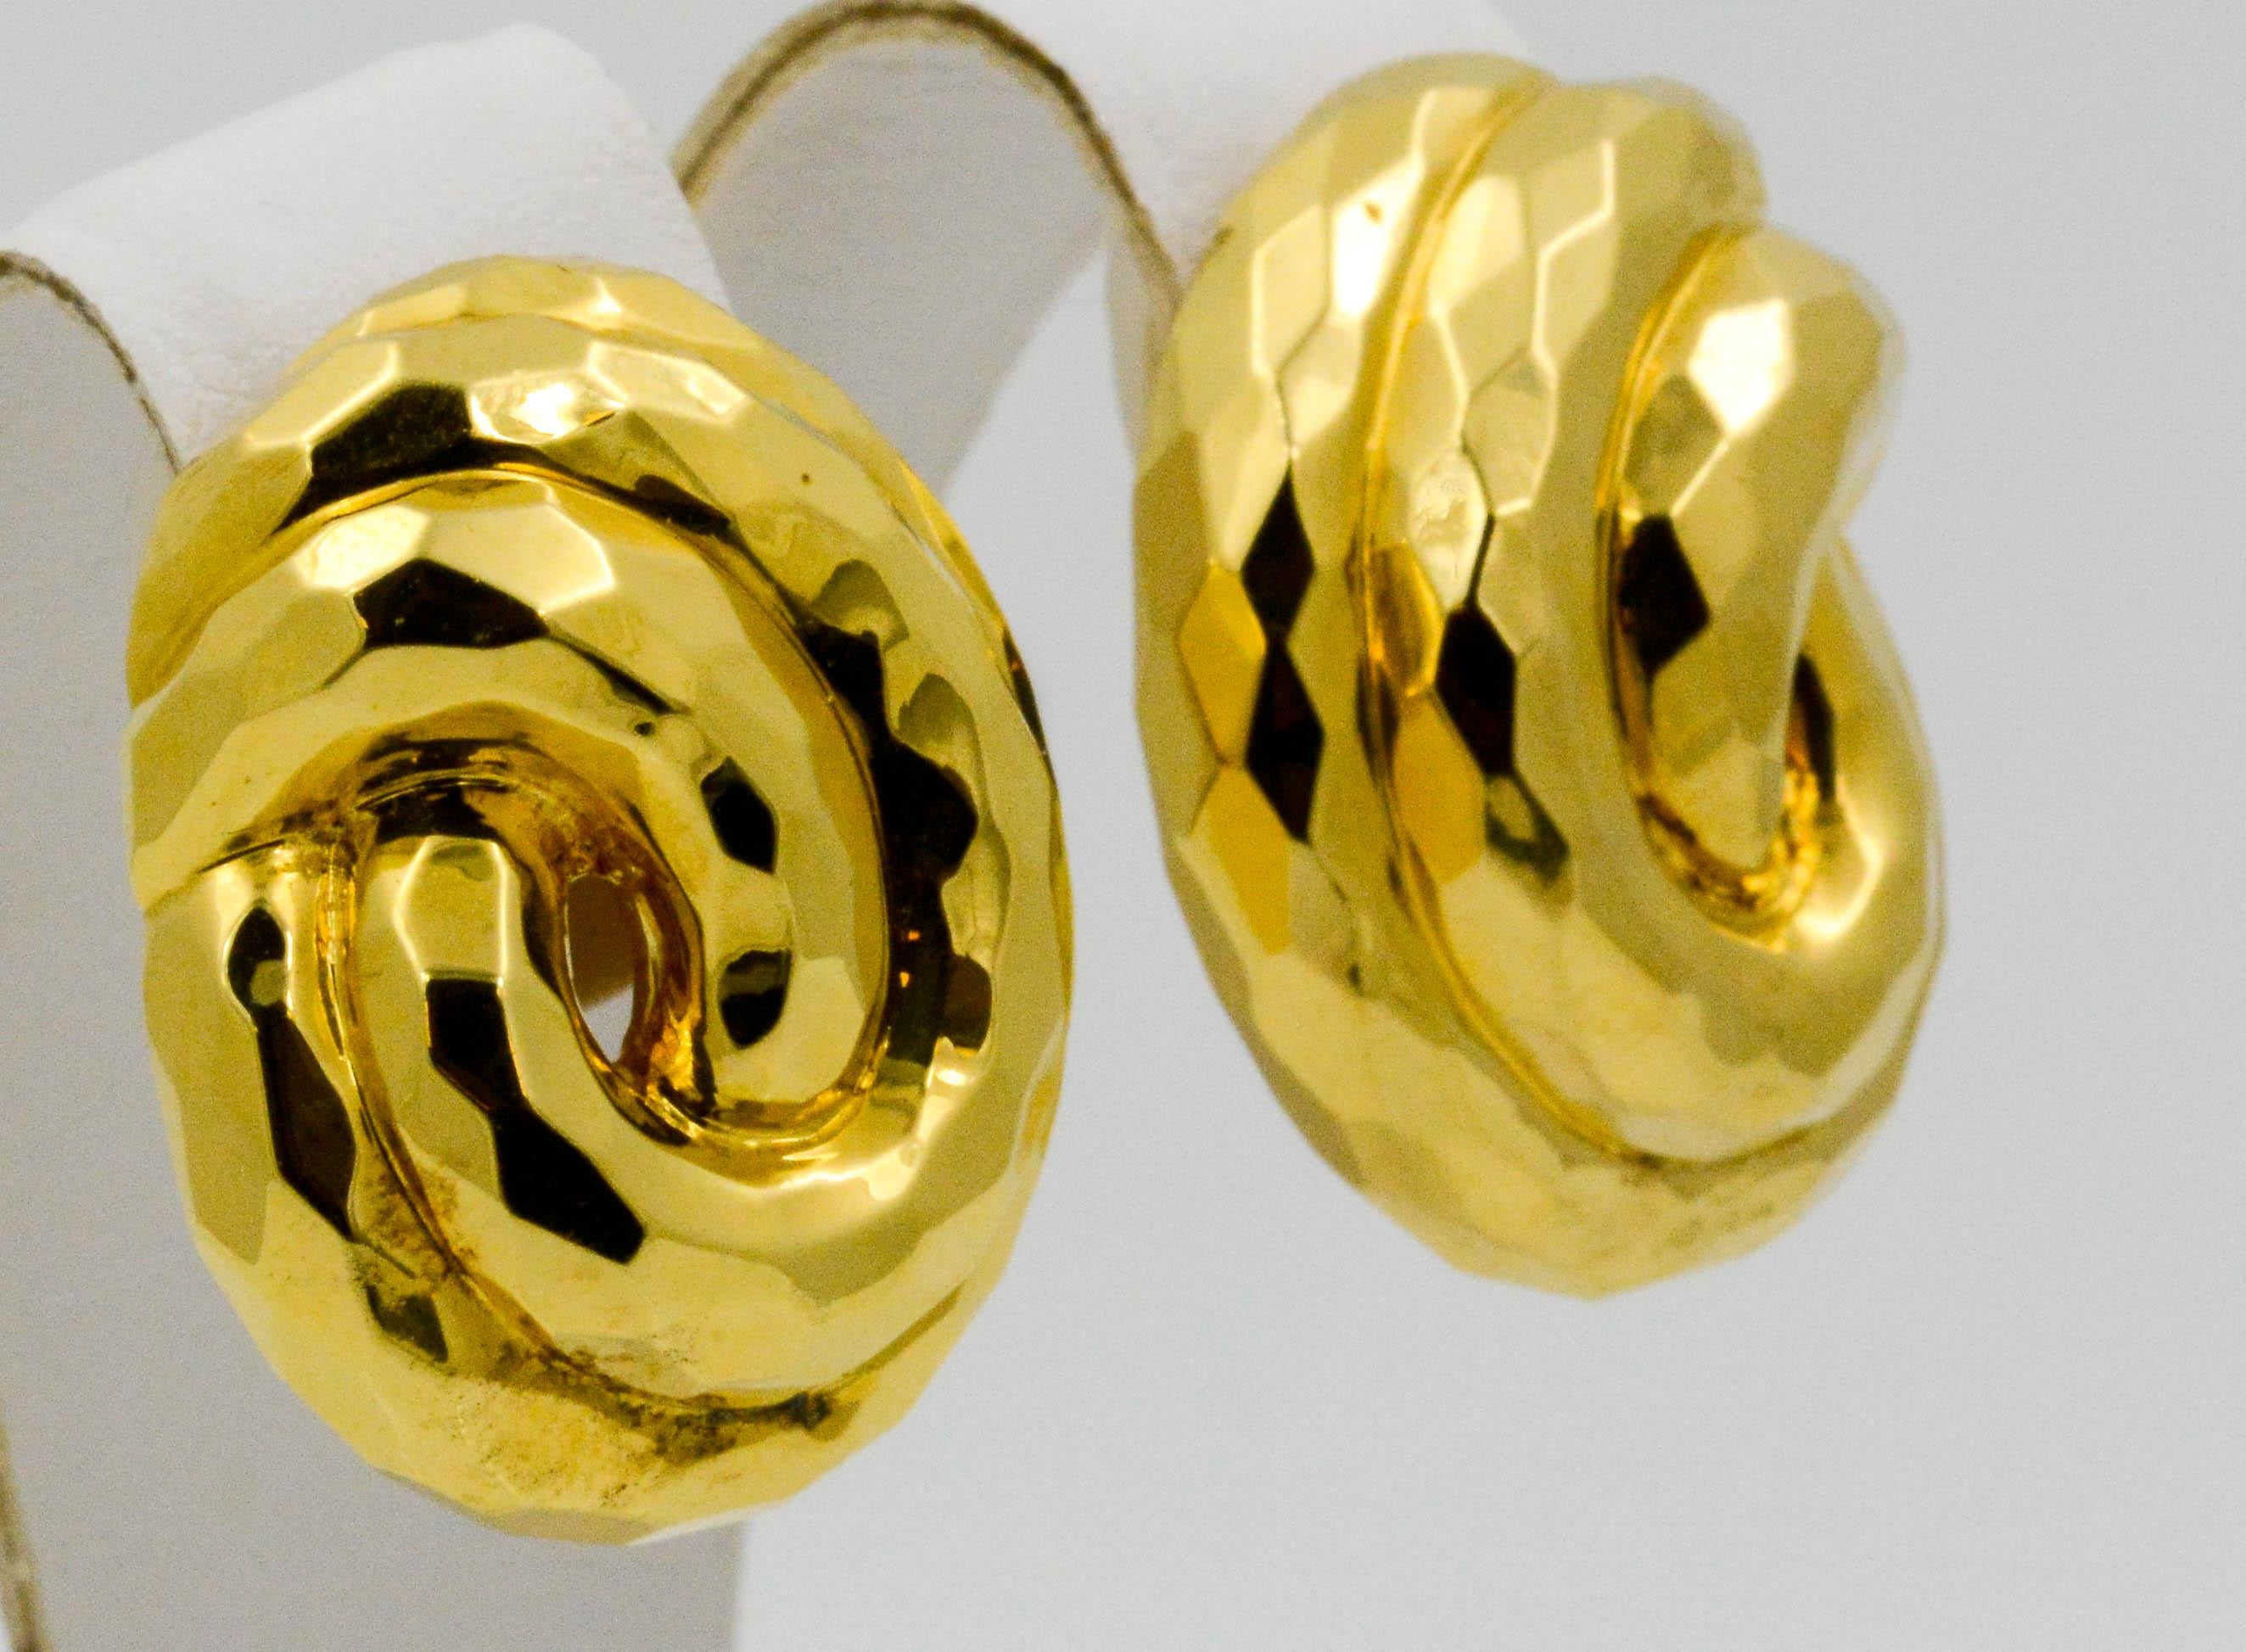 These Henry Dunay 18k yellow gold clip earrings create a polish and classic look. The earrings have a swirl pattern that consists of two intertwining loops to give a classic knotted design.  